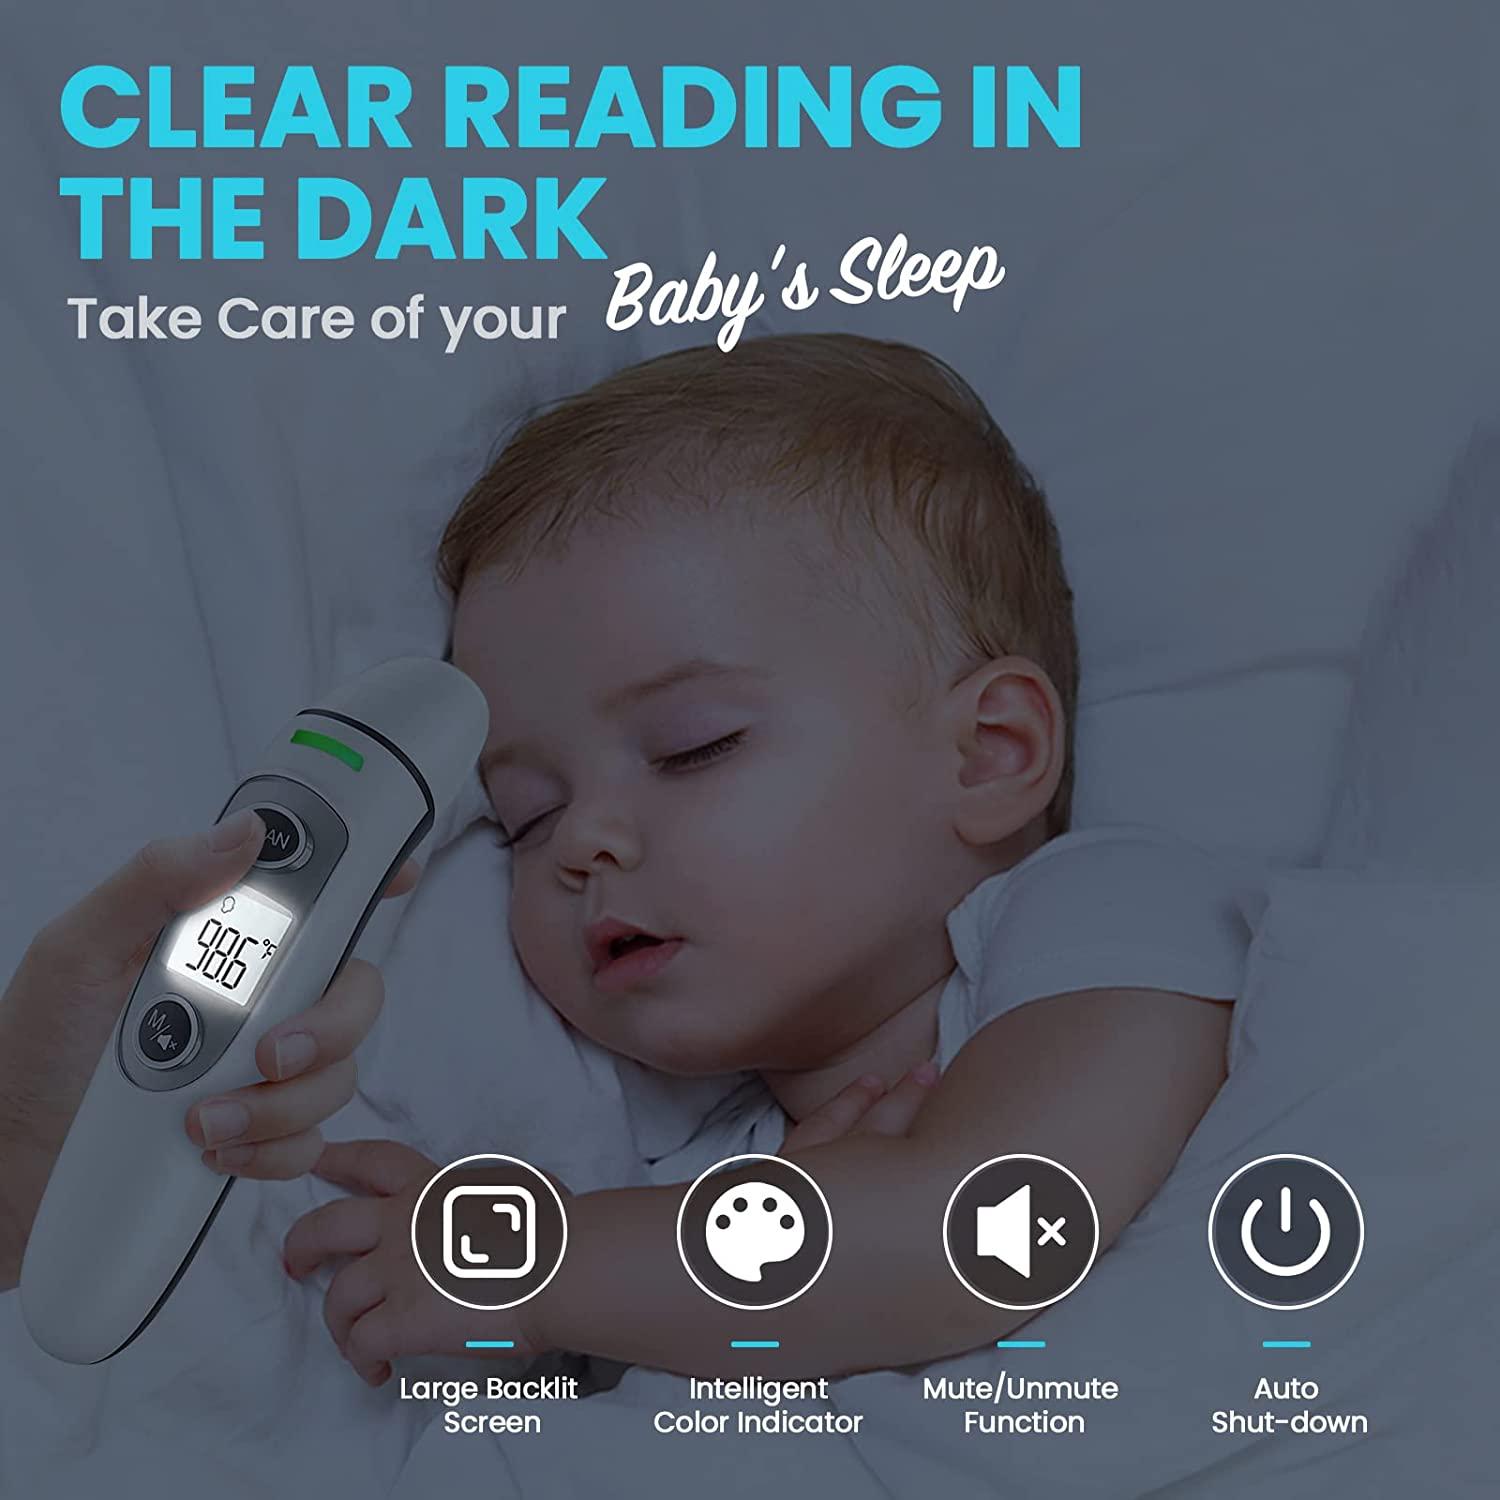 How To Take Your Baby's Temperature With Digital Thermometer?